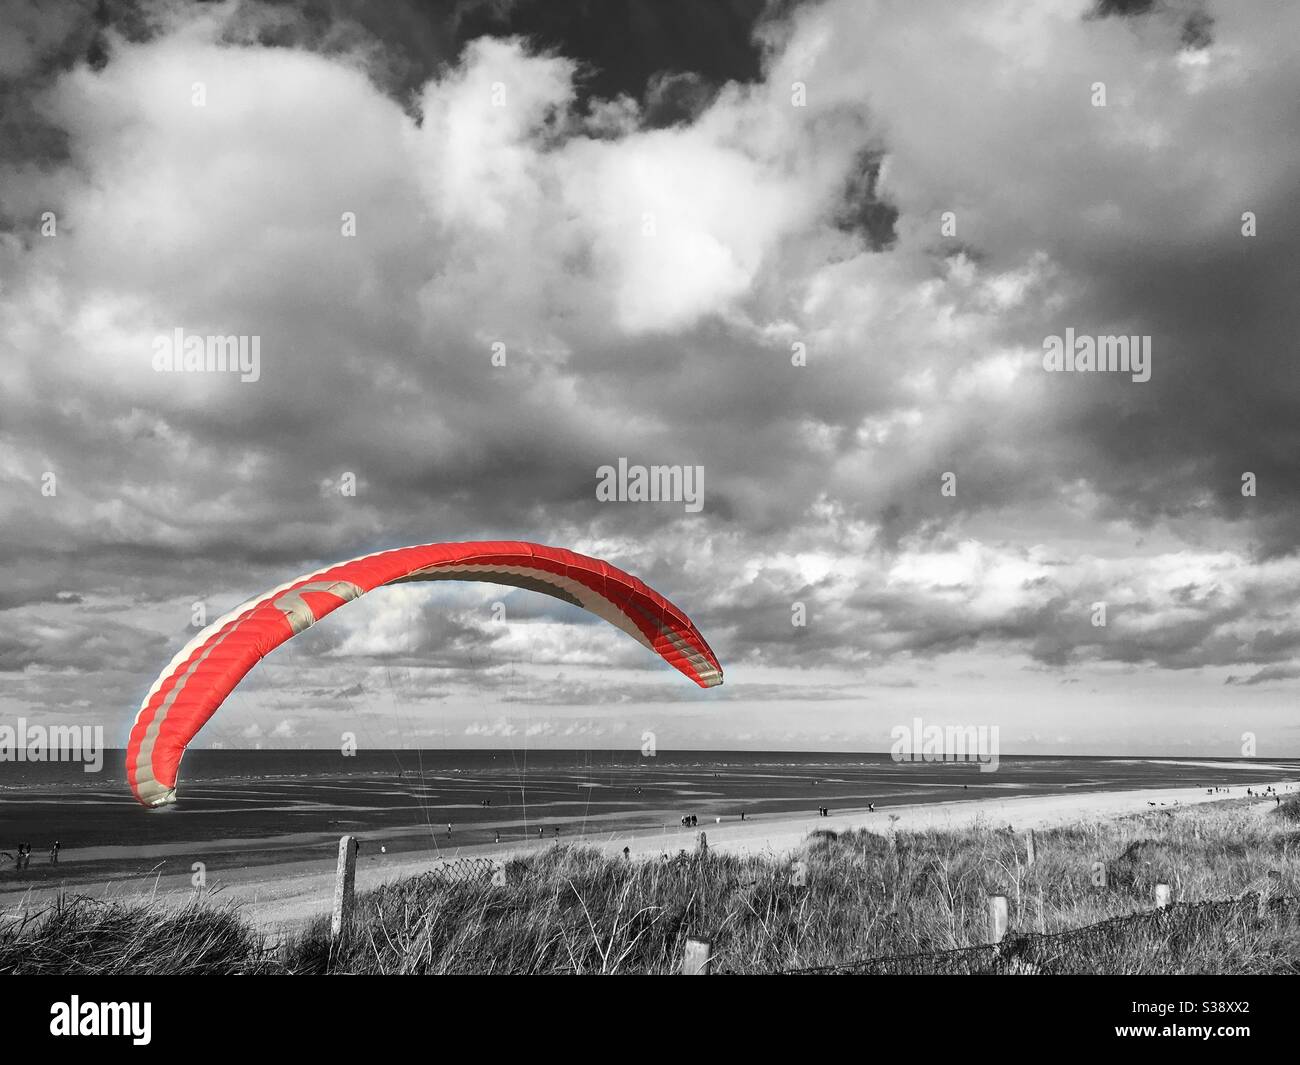 Selective edit of a Paraglider canopy at Old Hunstanton beach. The canopy is red & grey and the background in mono Stock Photo